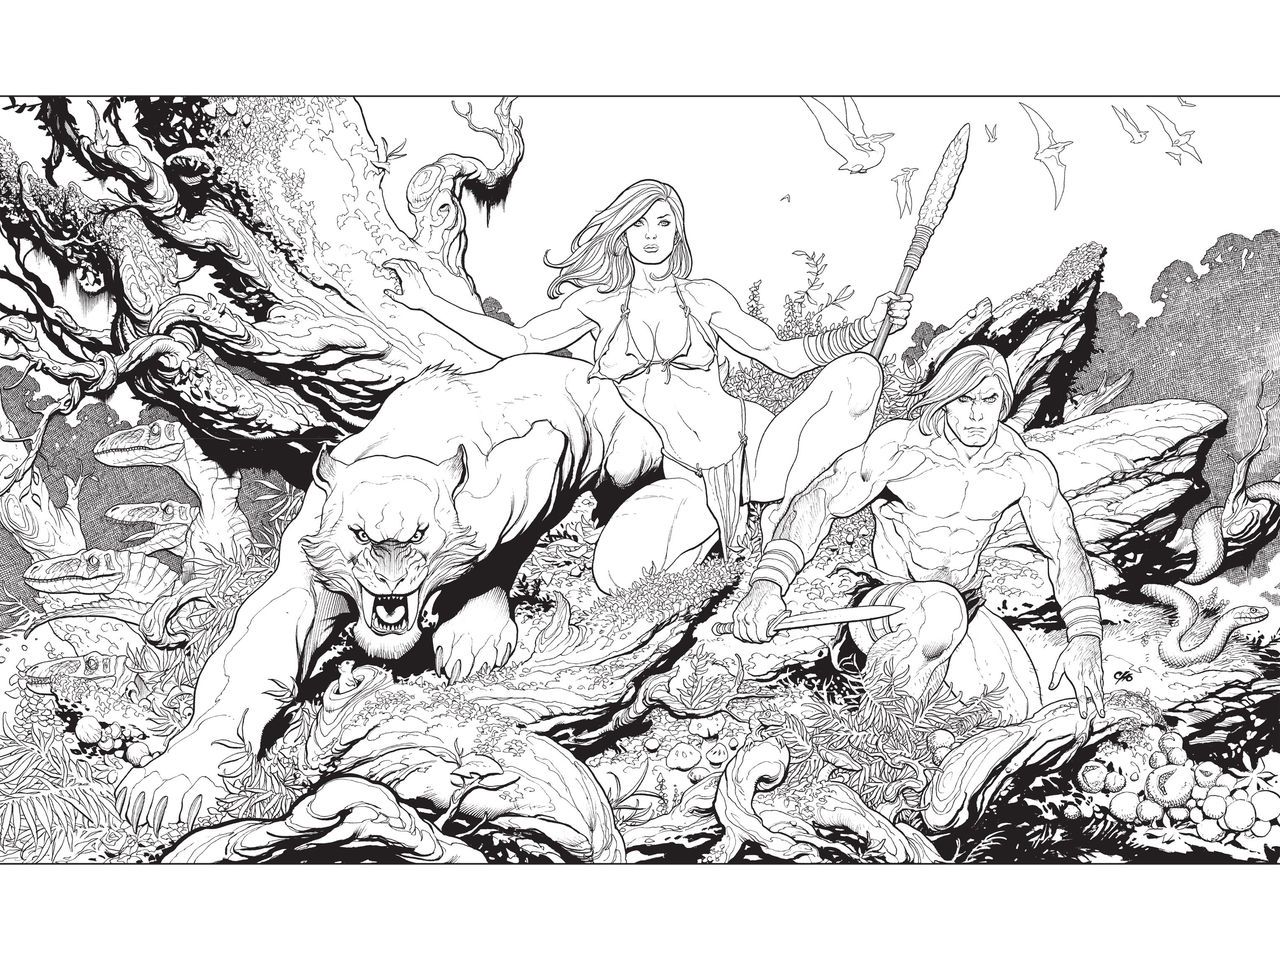 [Frank Cho] Apes & Babes: The Art Of Frank Cho 94